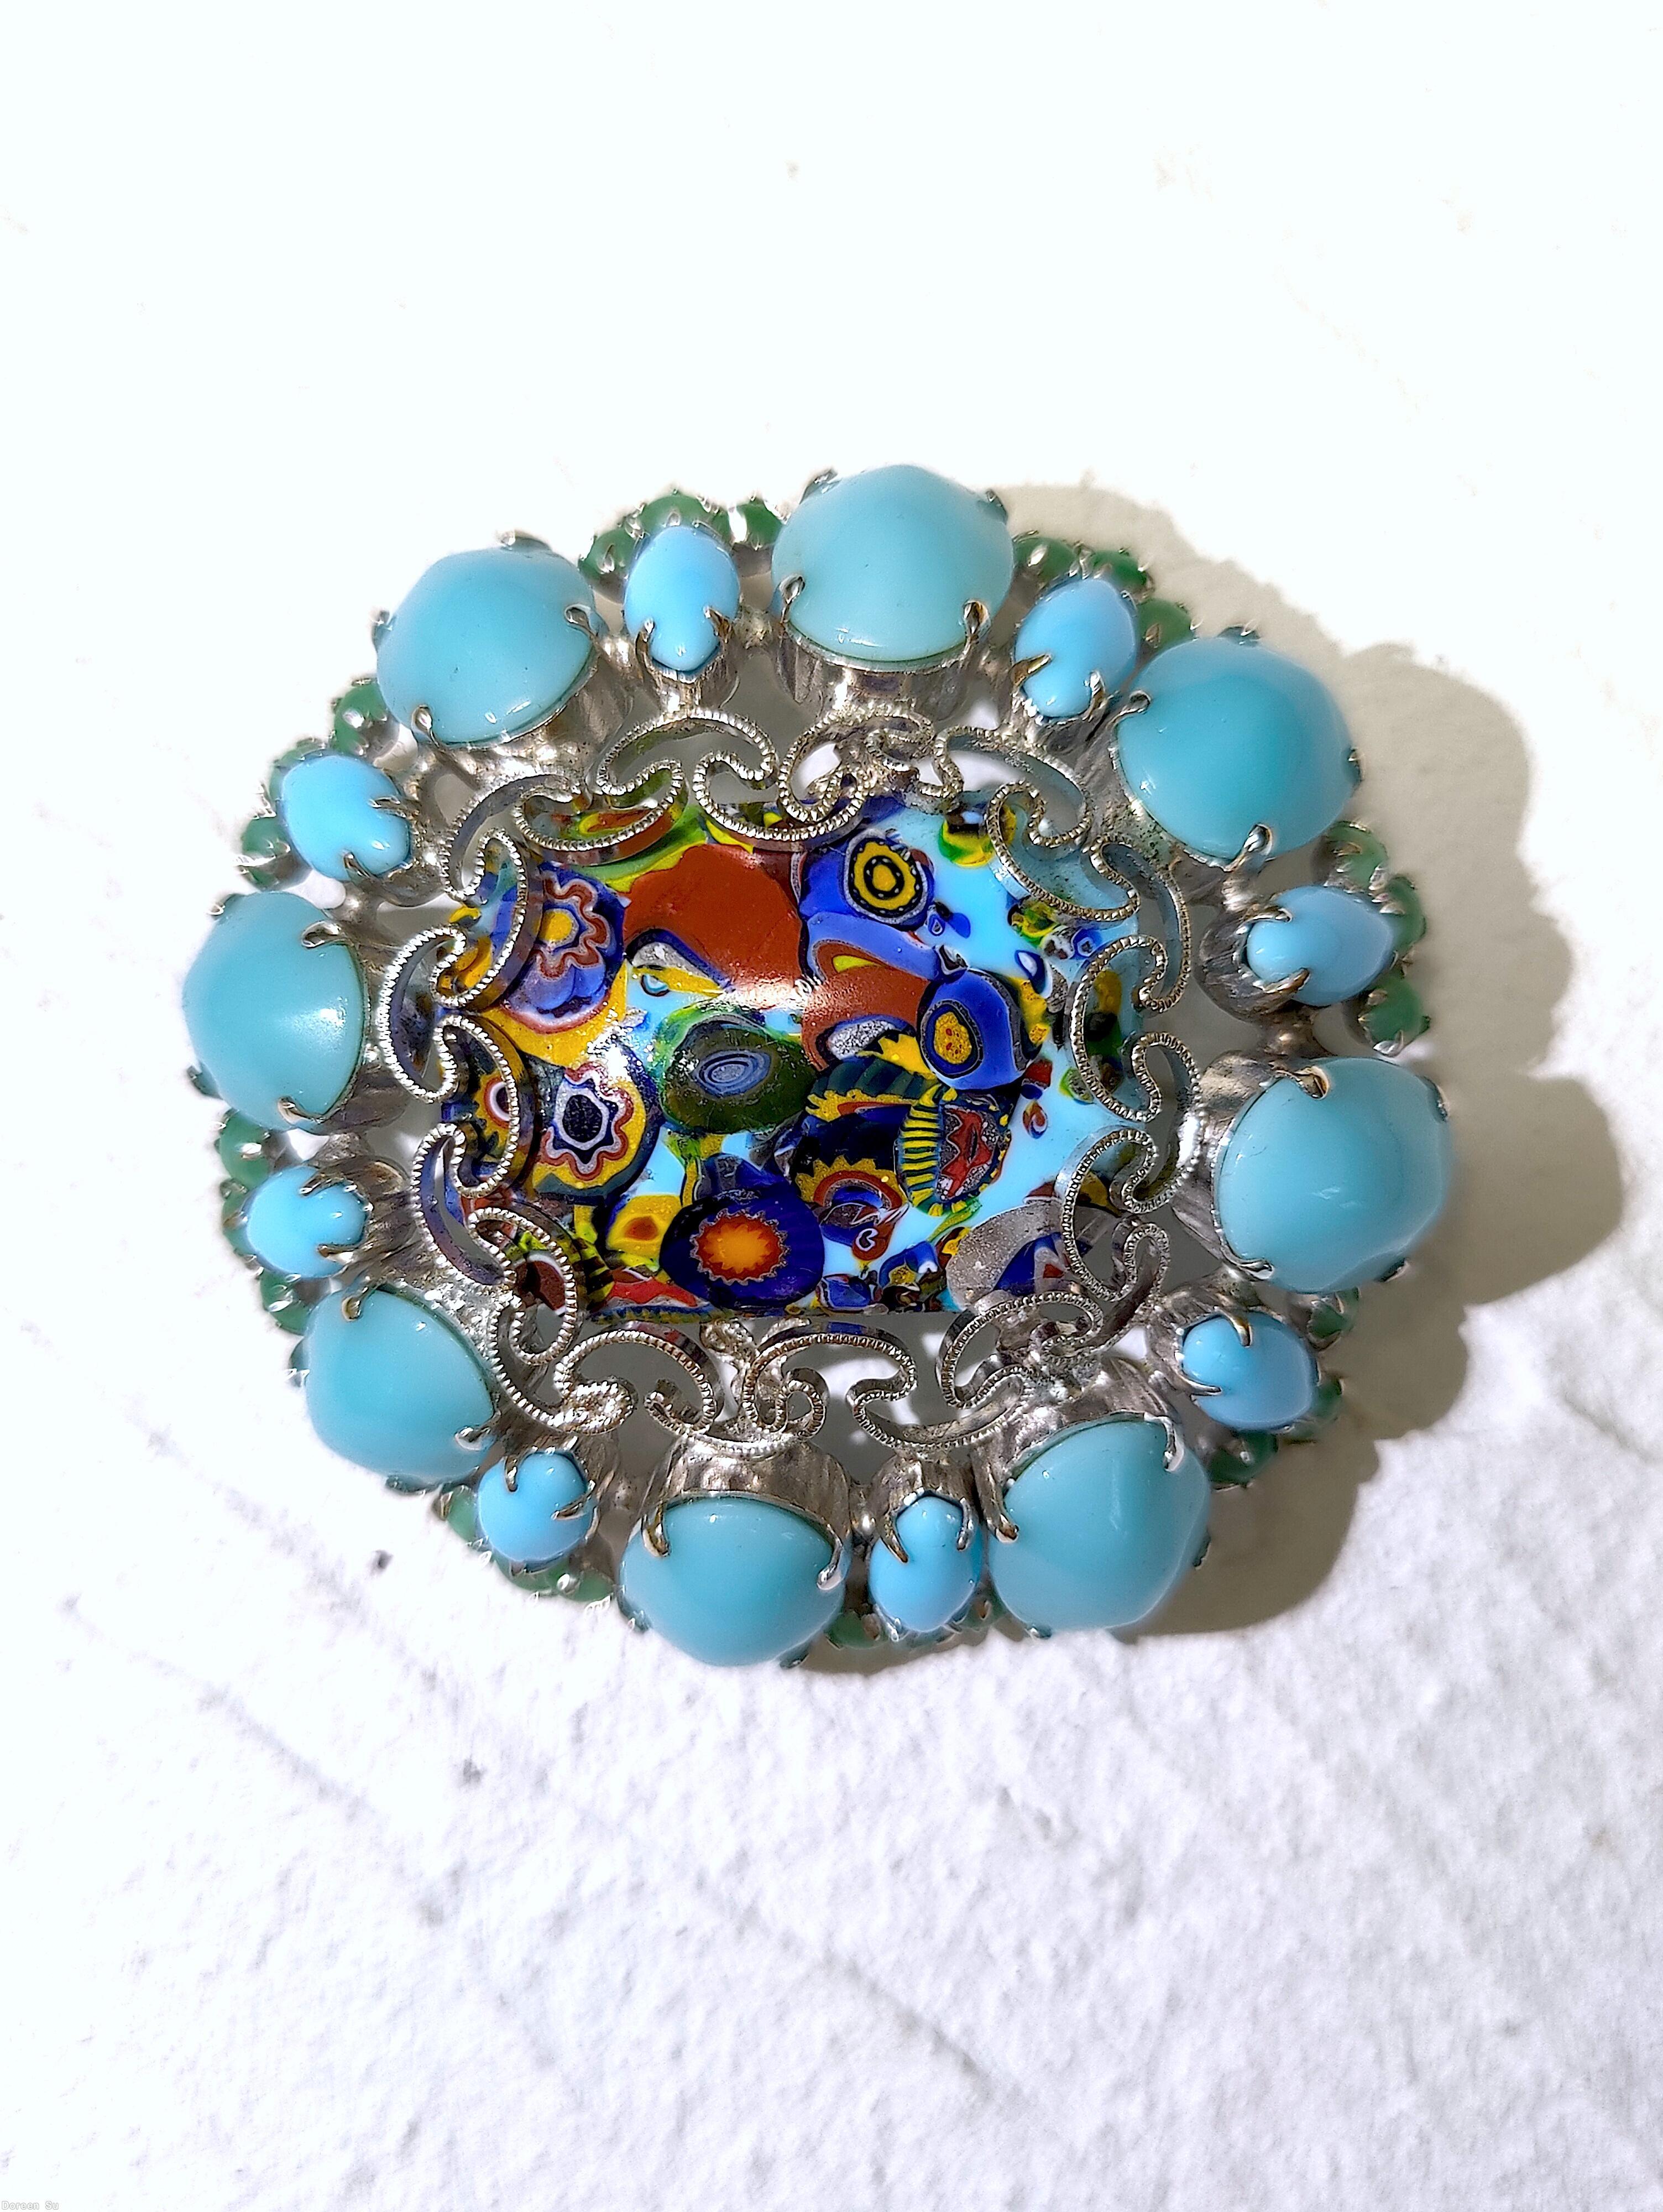 Schreiner oval shaped radial domed millefiori pin filigree 8 oval cab 8 navette large oval center millefiori moonglow aqua large oval cab opaque baby blue navette peking glass small chaton blue fillefiori silvertone jewelry